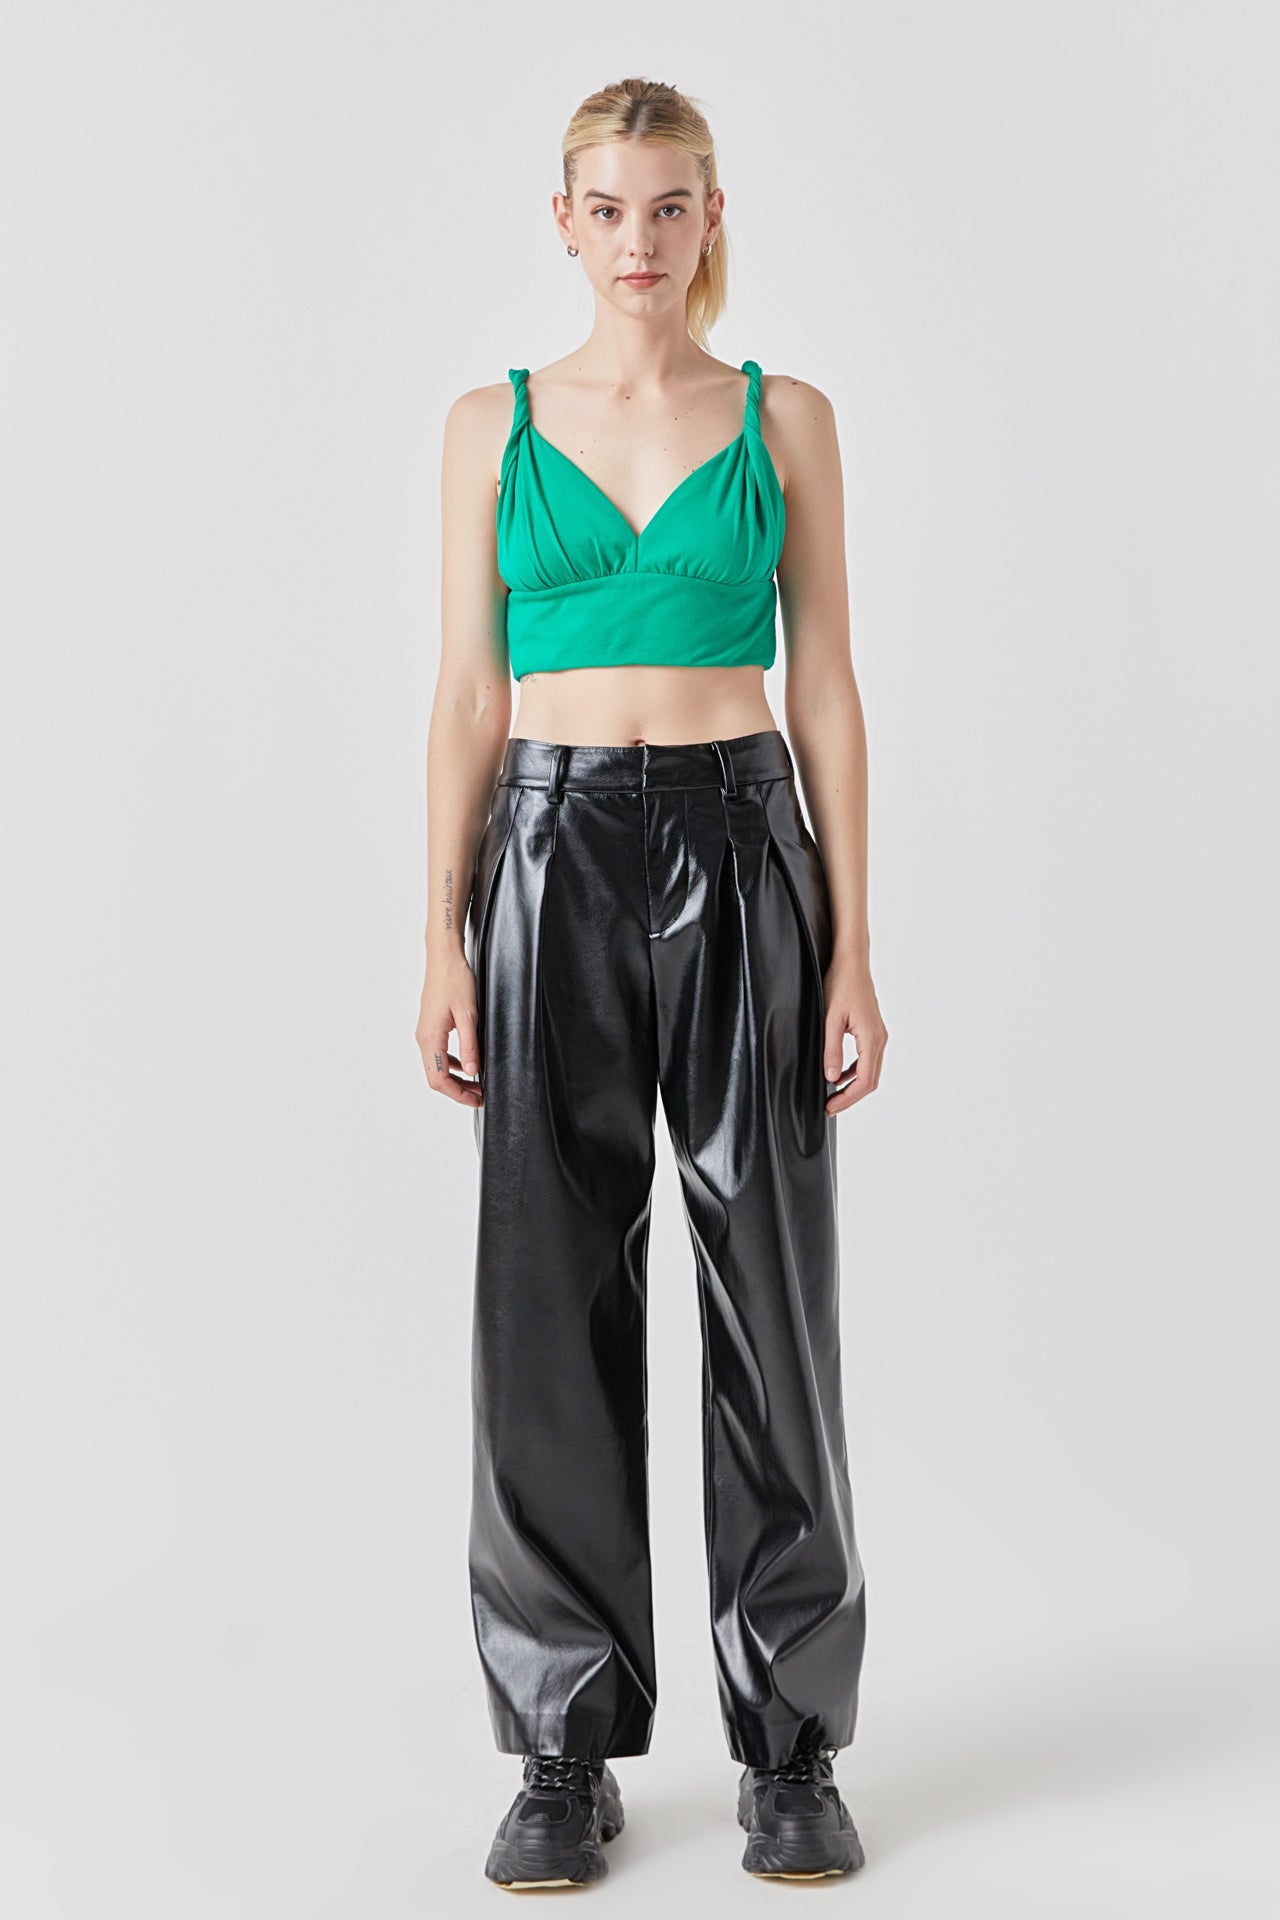 GREY LAB - Pleated PU Pants - PANTS available at Objectrare